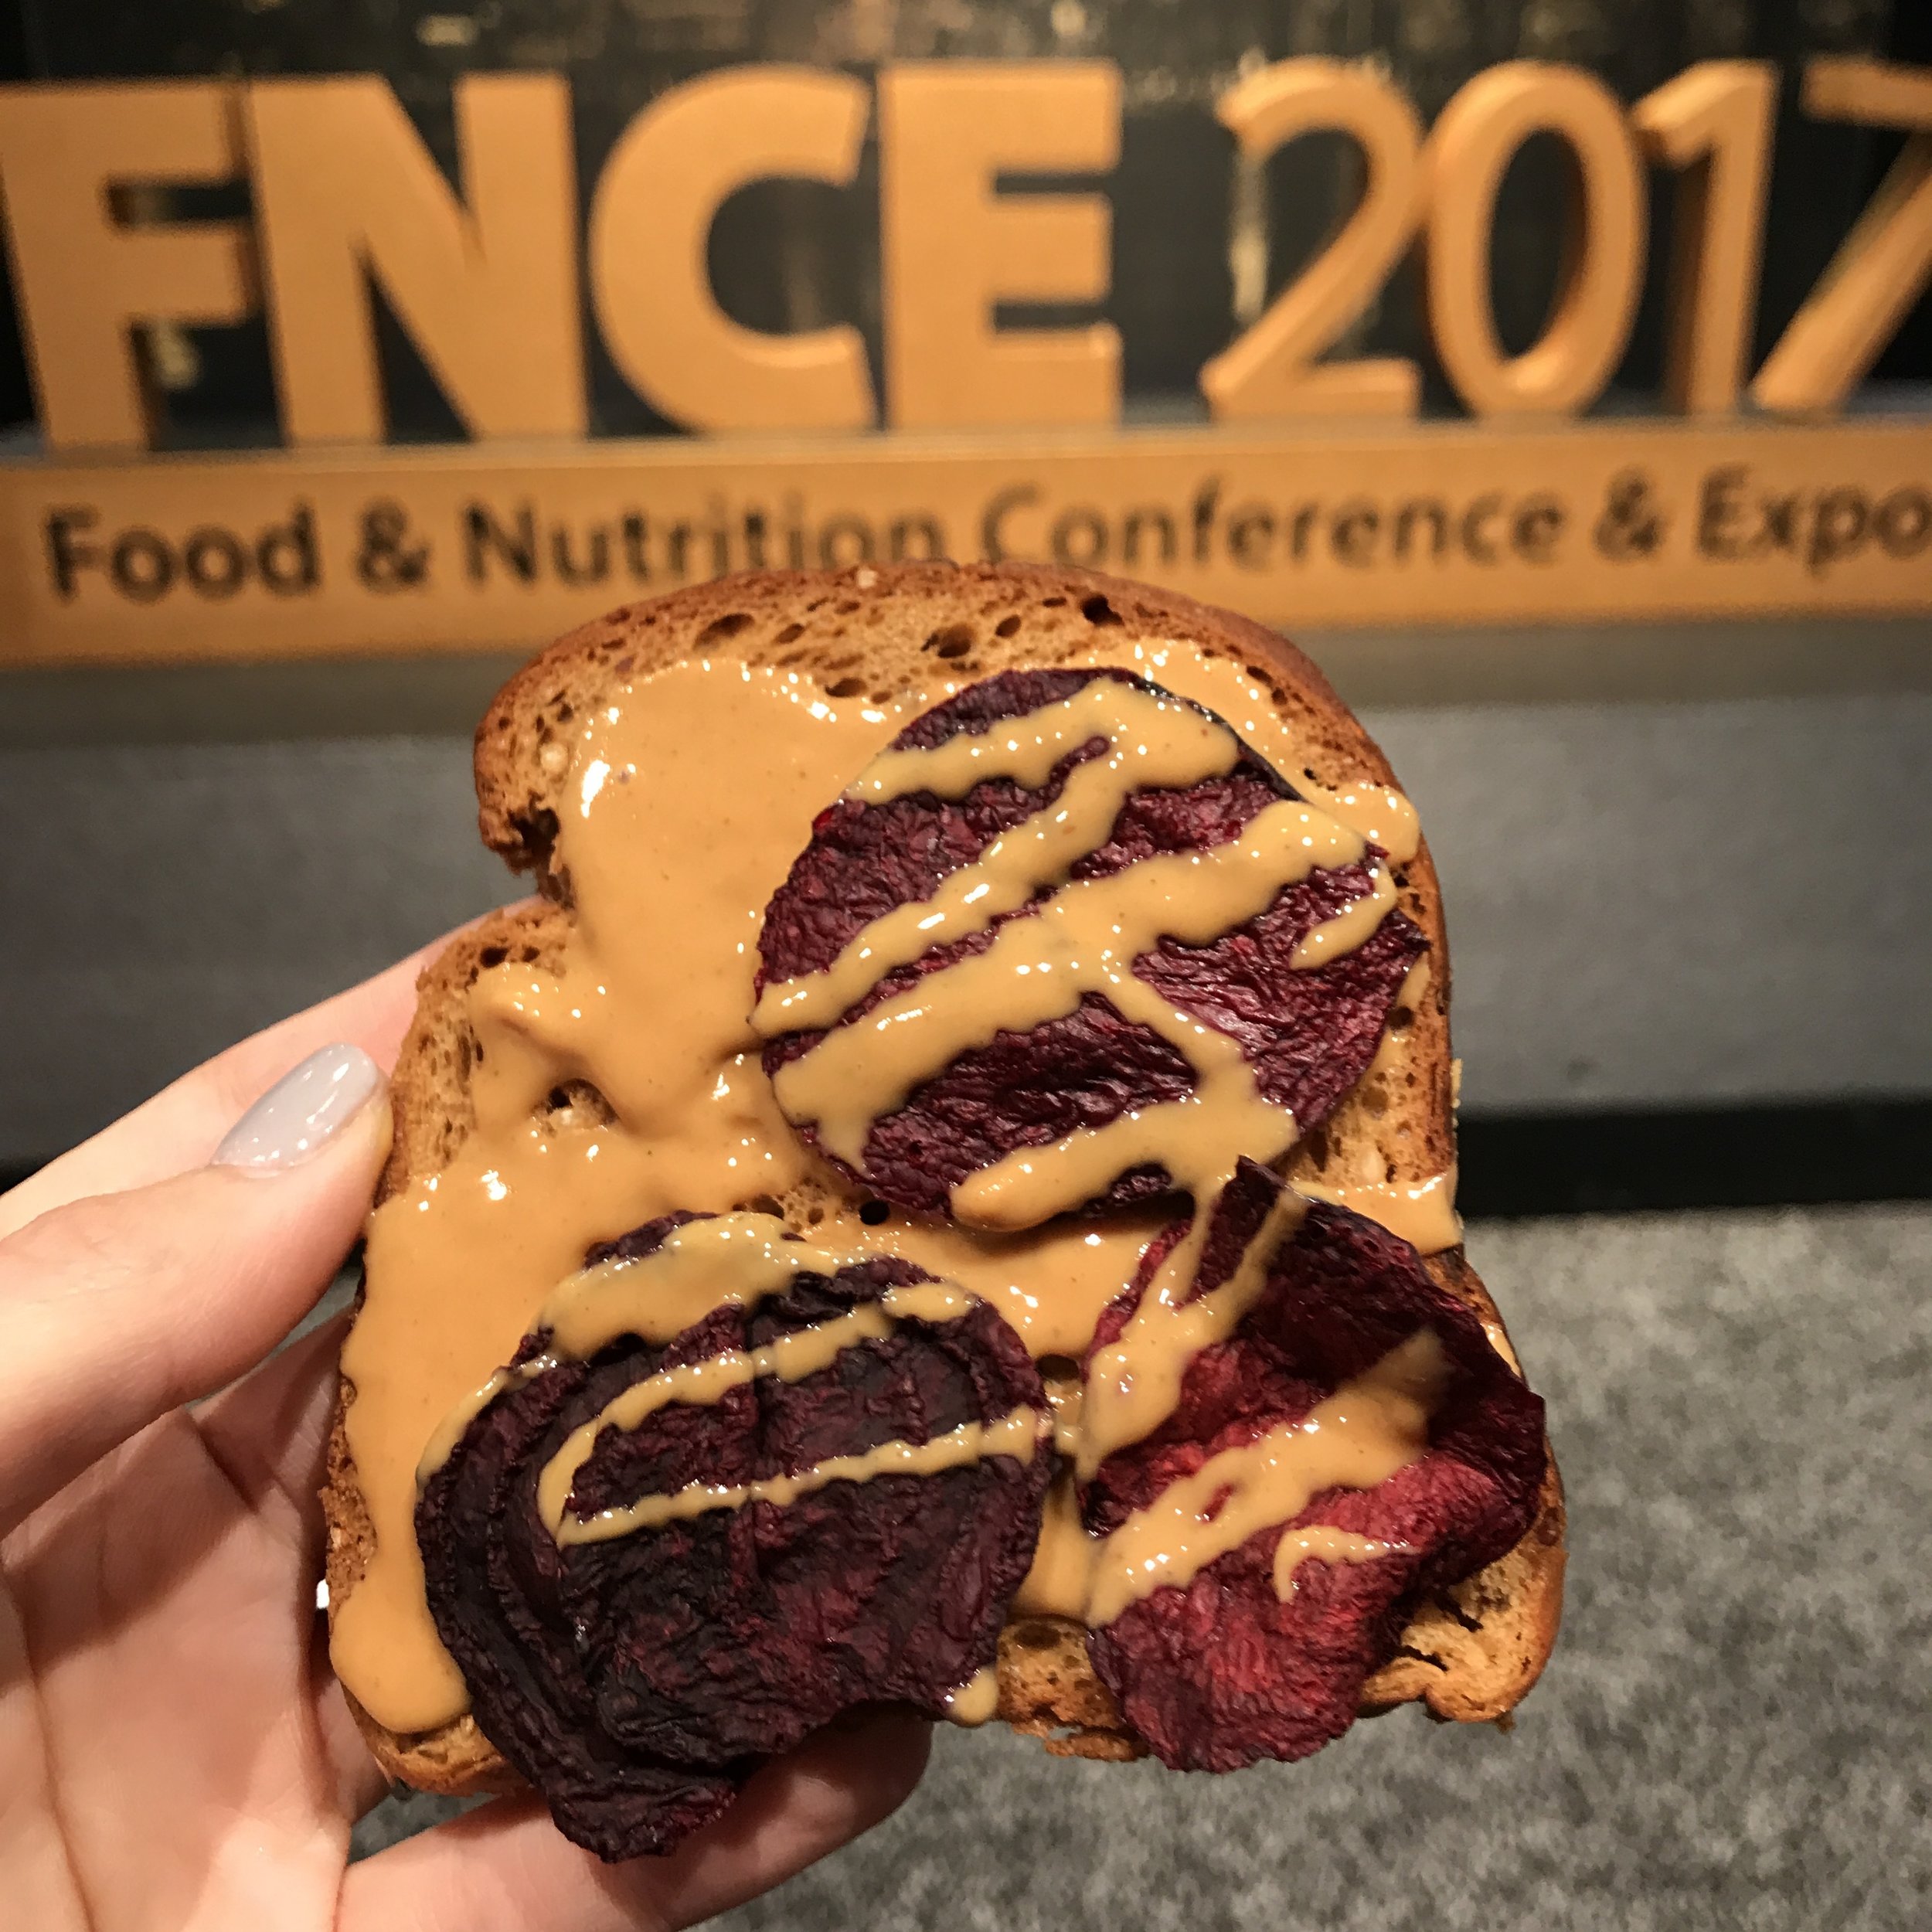  The last day of FNCE was a Tuesday... so naturally, I felt the need to celebrate #toasttuesday using my favorite Expo samples: Rhythm Superfoods Beet Chips, Crazy Richard's Peanut Butter, and Schar Gluten Free Bread. 